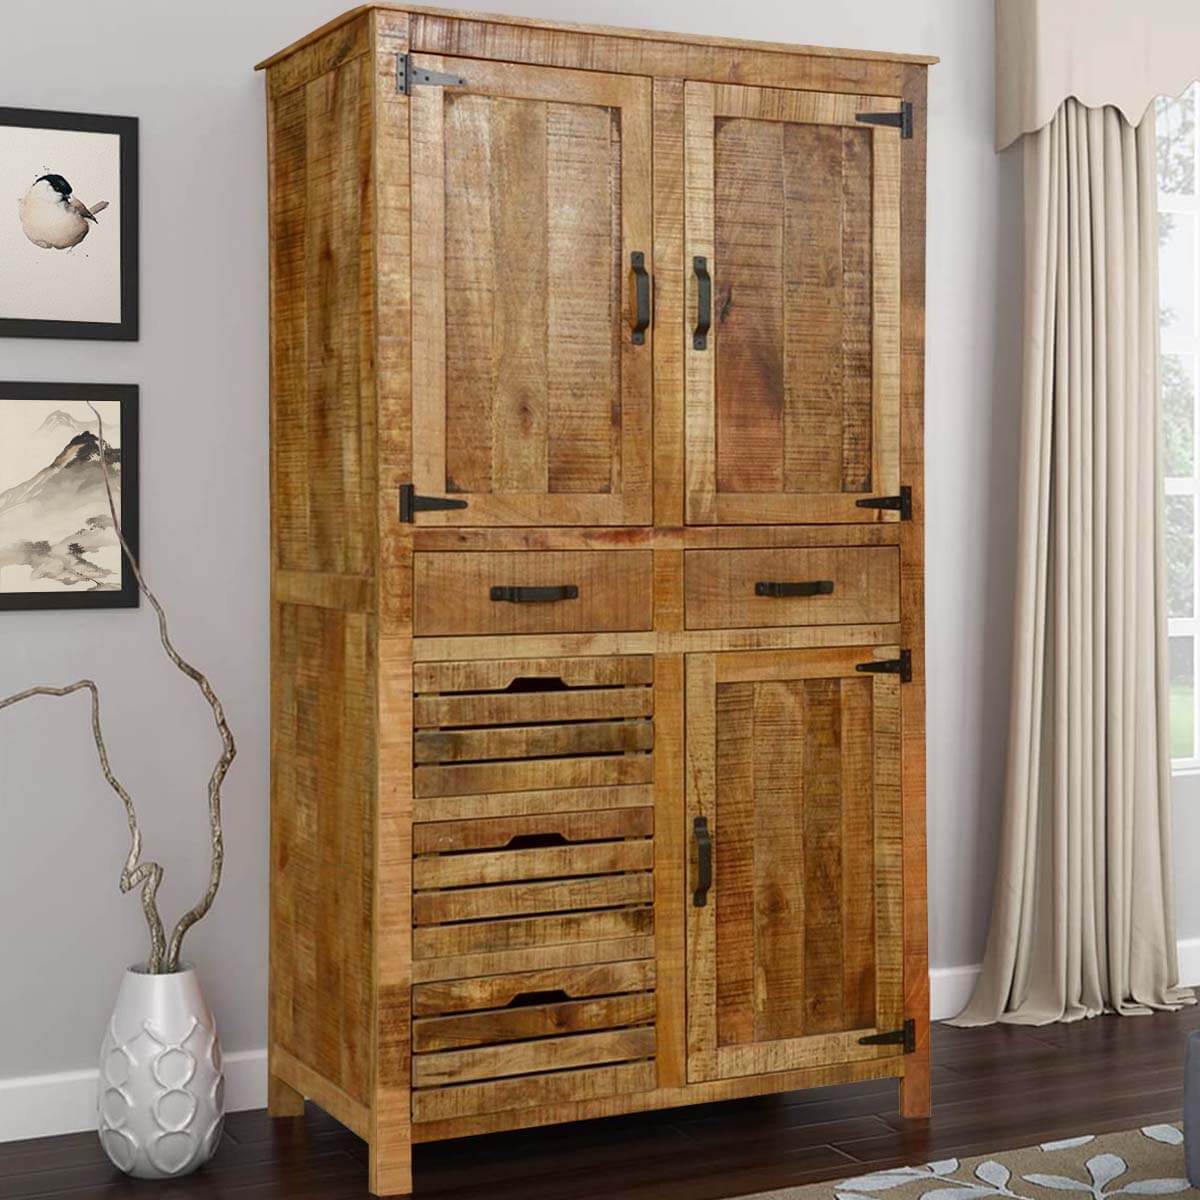 https://www.sierralivingconcepts.com/images/thumbs/0393430_pioneer-rustic-solid-wood-79-tall-armoire-with-shelves-drawers.jpeg